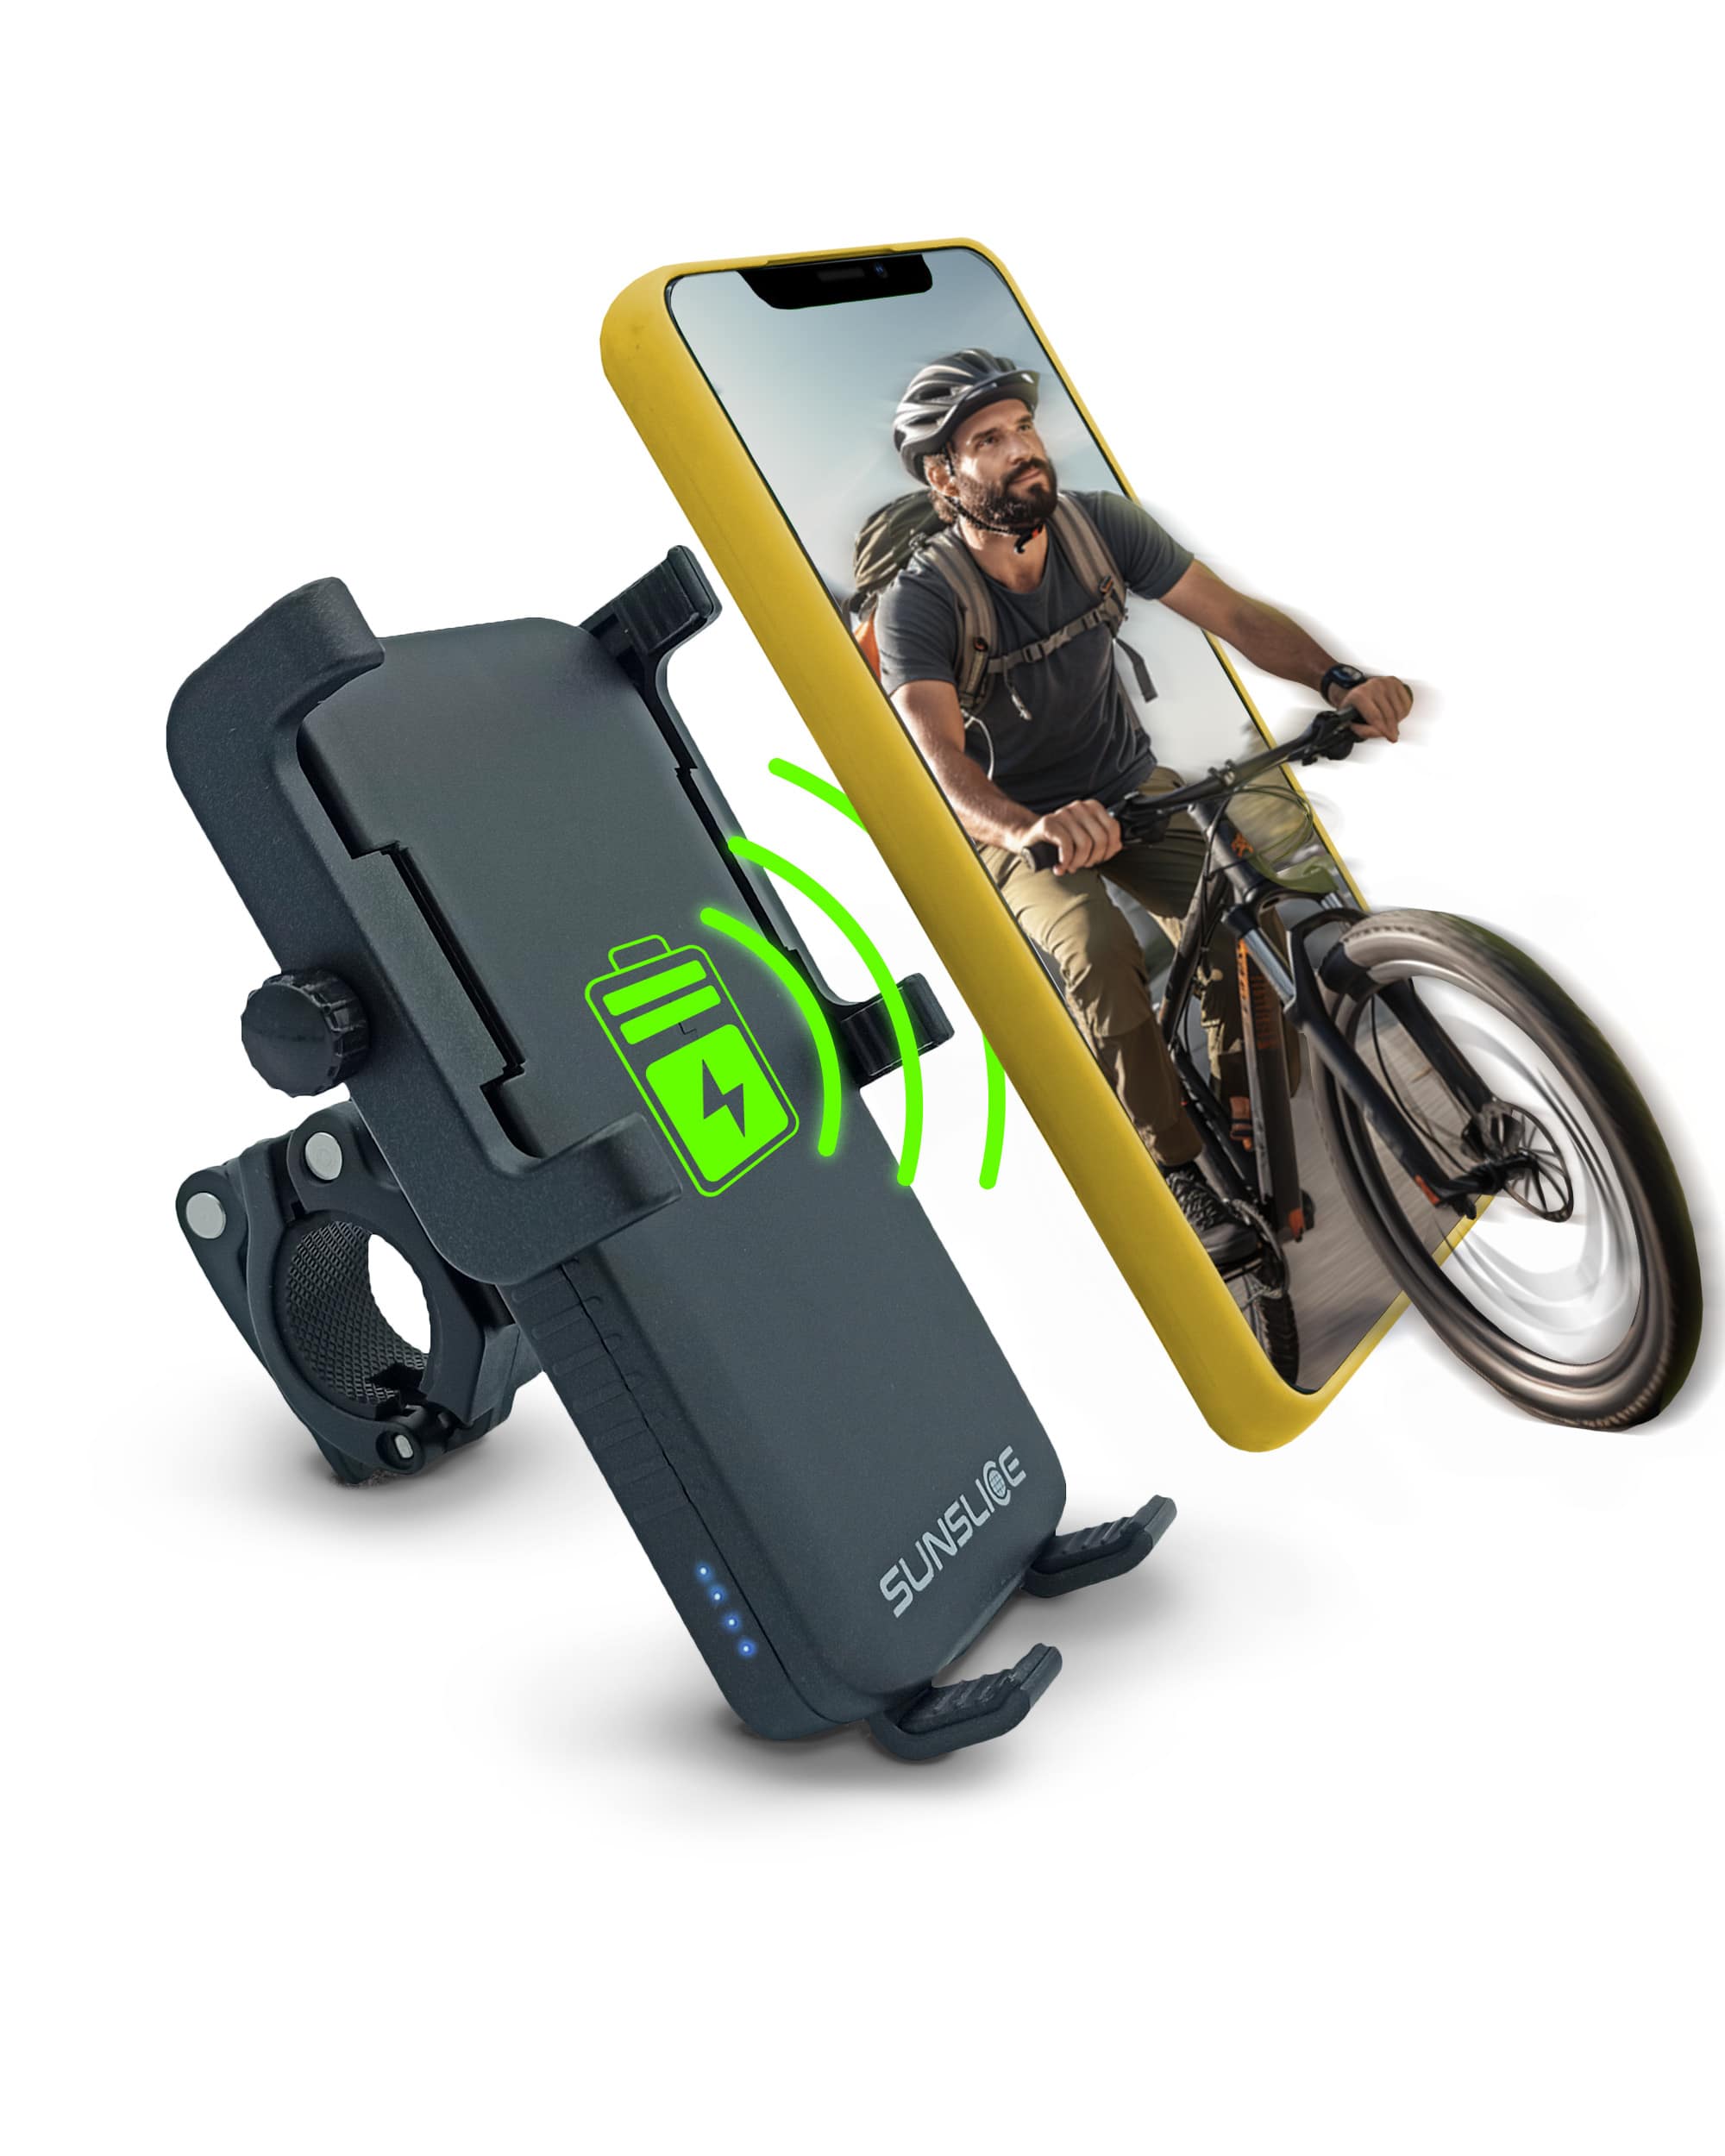 smartphone on a motorcycle phone charger